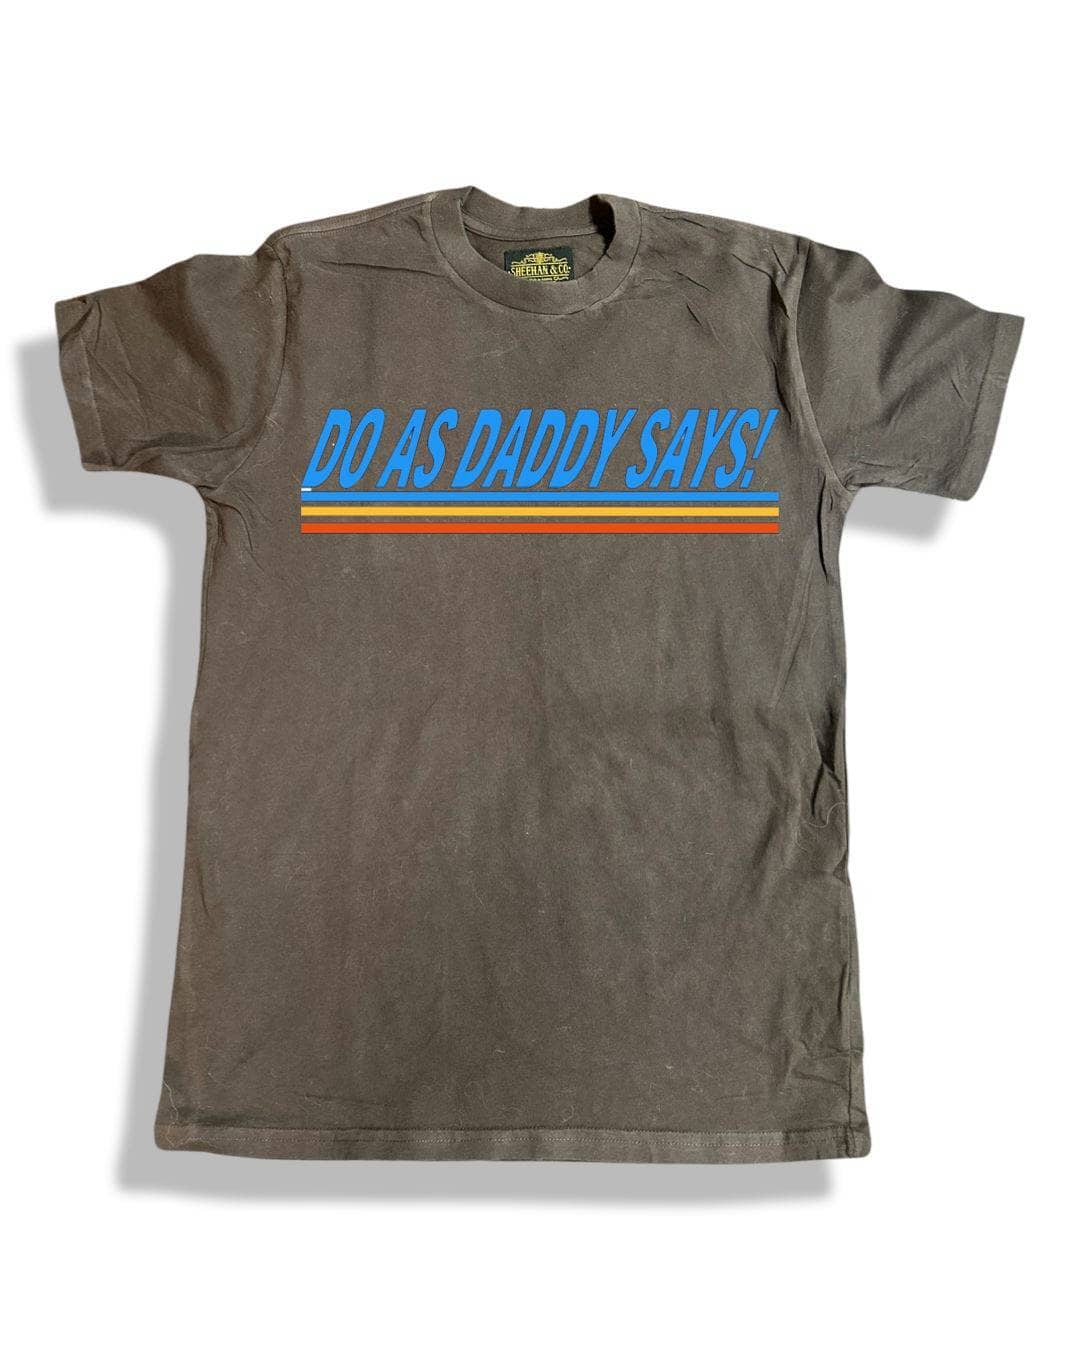 Do As Daddy Says Statement Tee - Sheehan and Co.